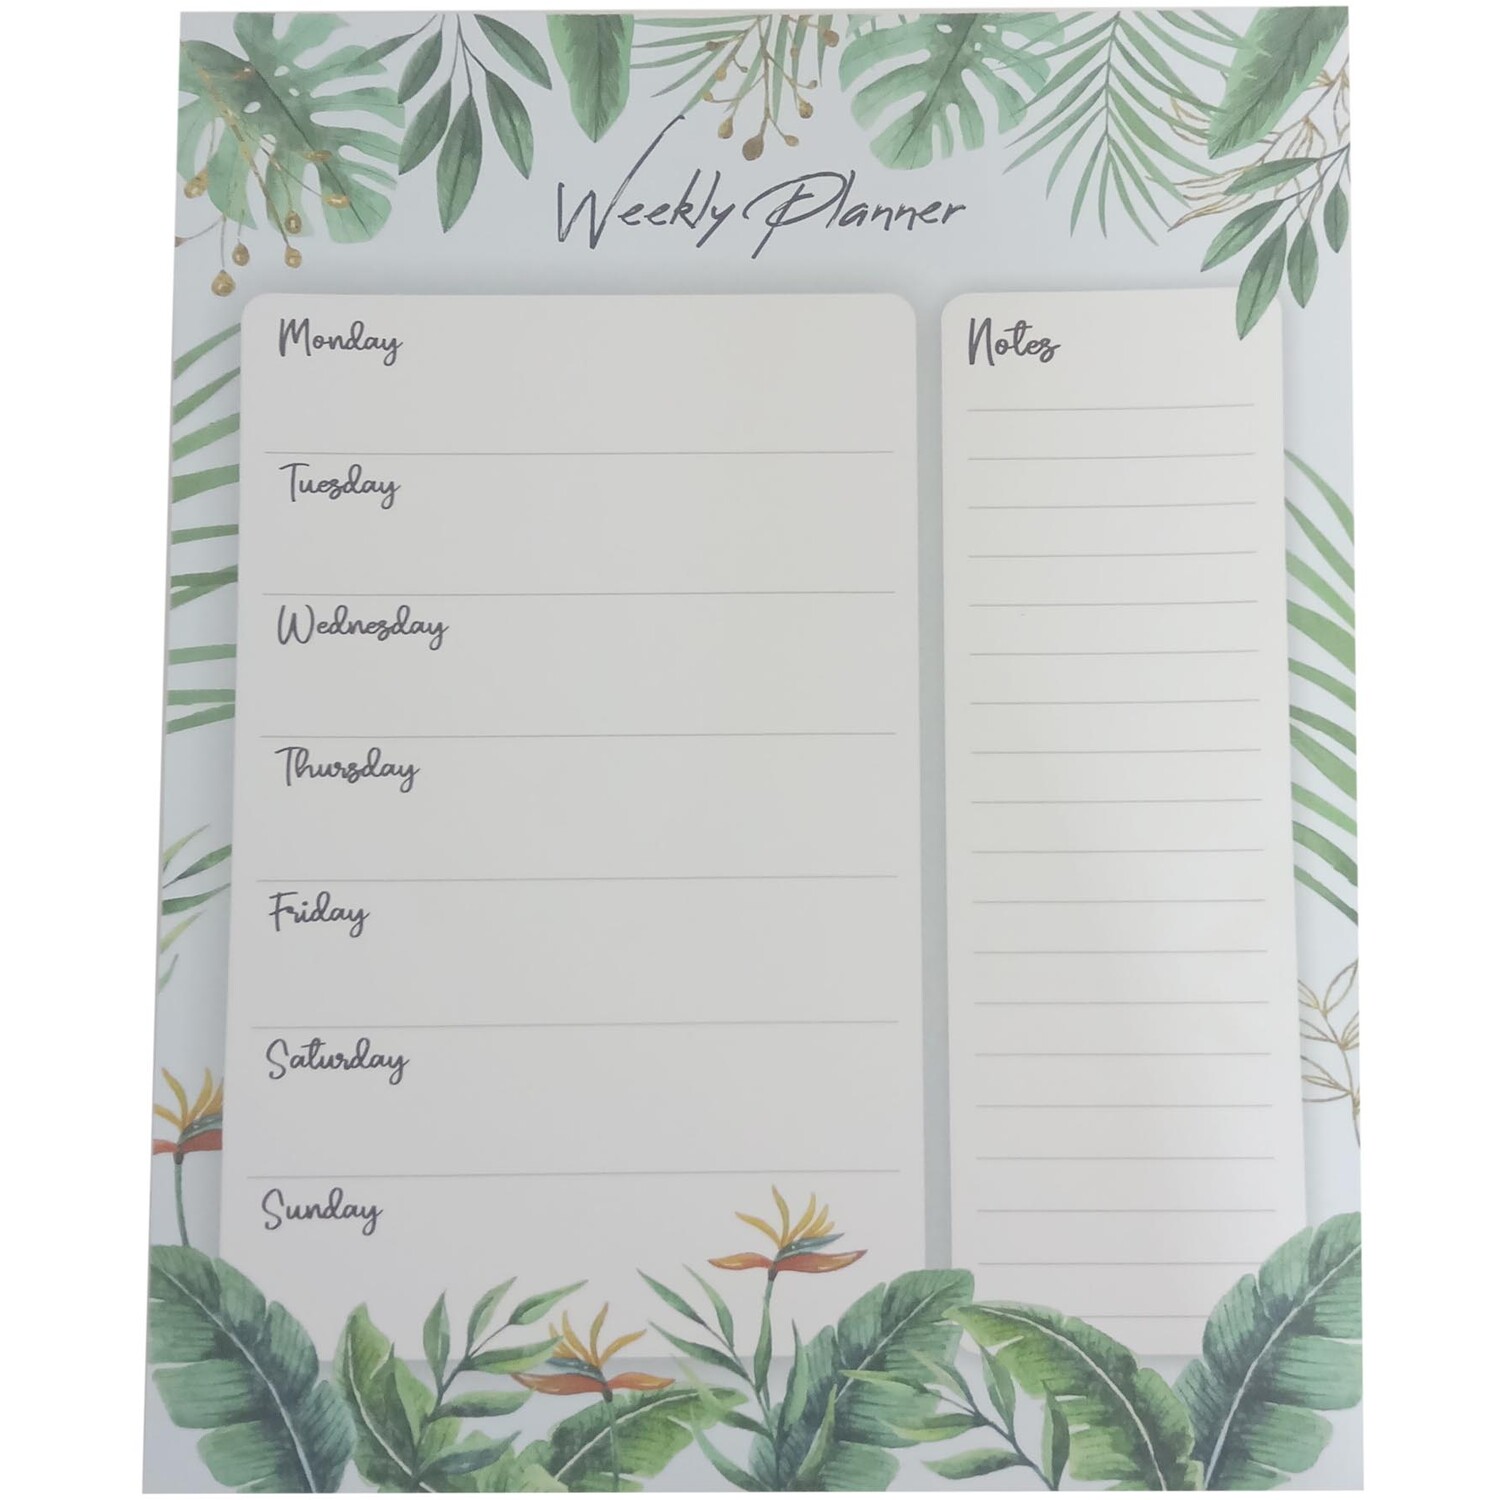 Weekly Planner A5 Image 2